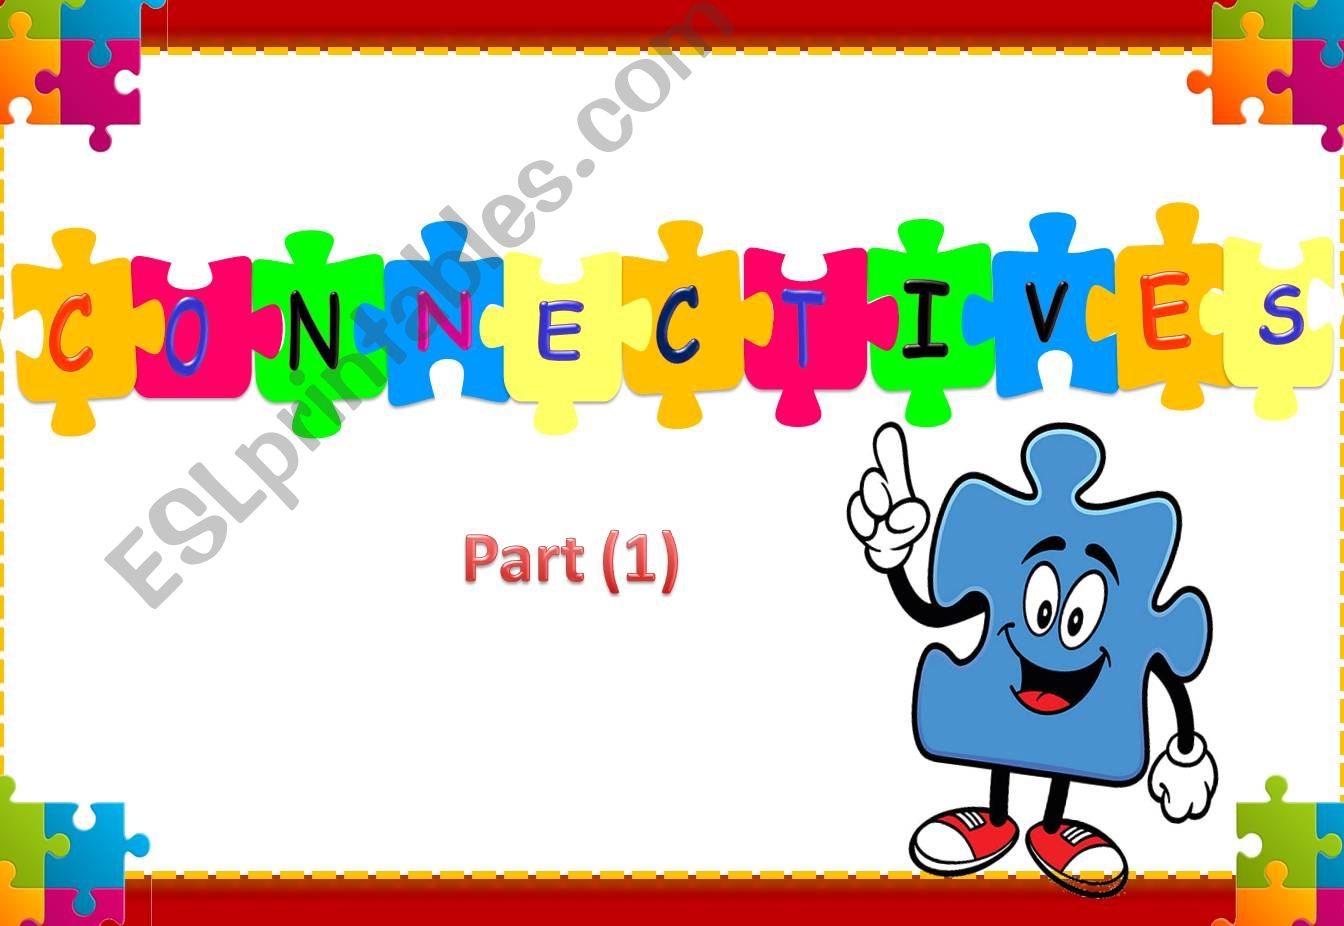 Conjunctions and connectives (Part 1)